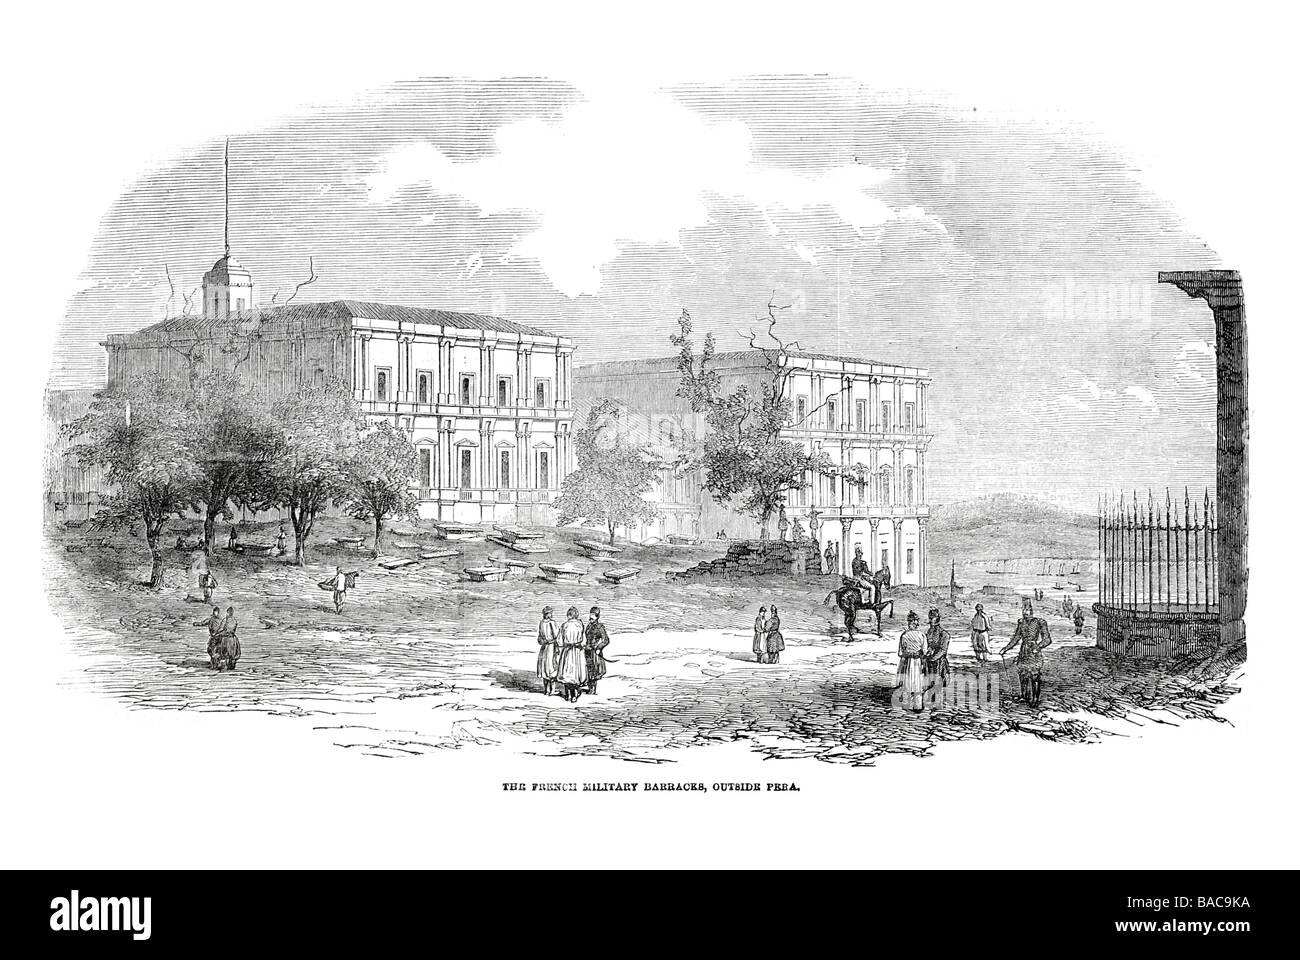 french military barracks outside pera 1854 living quarter quarters personnel military post buildings building housing unit Stock Photo